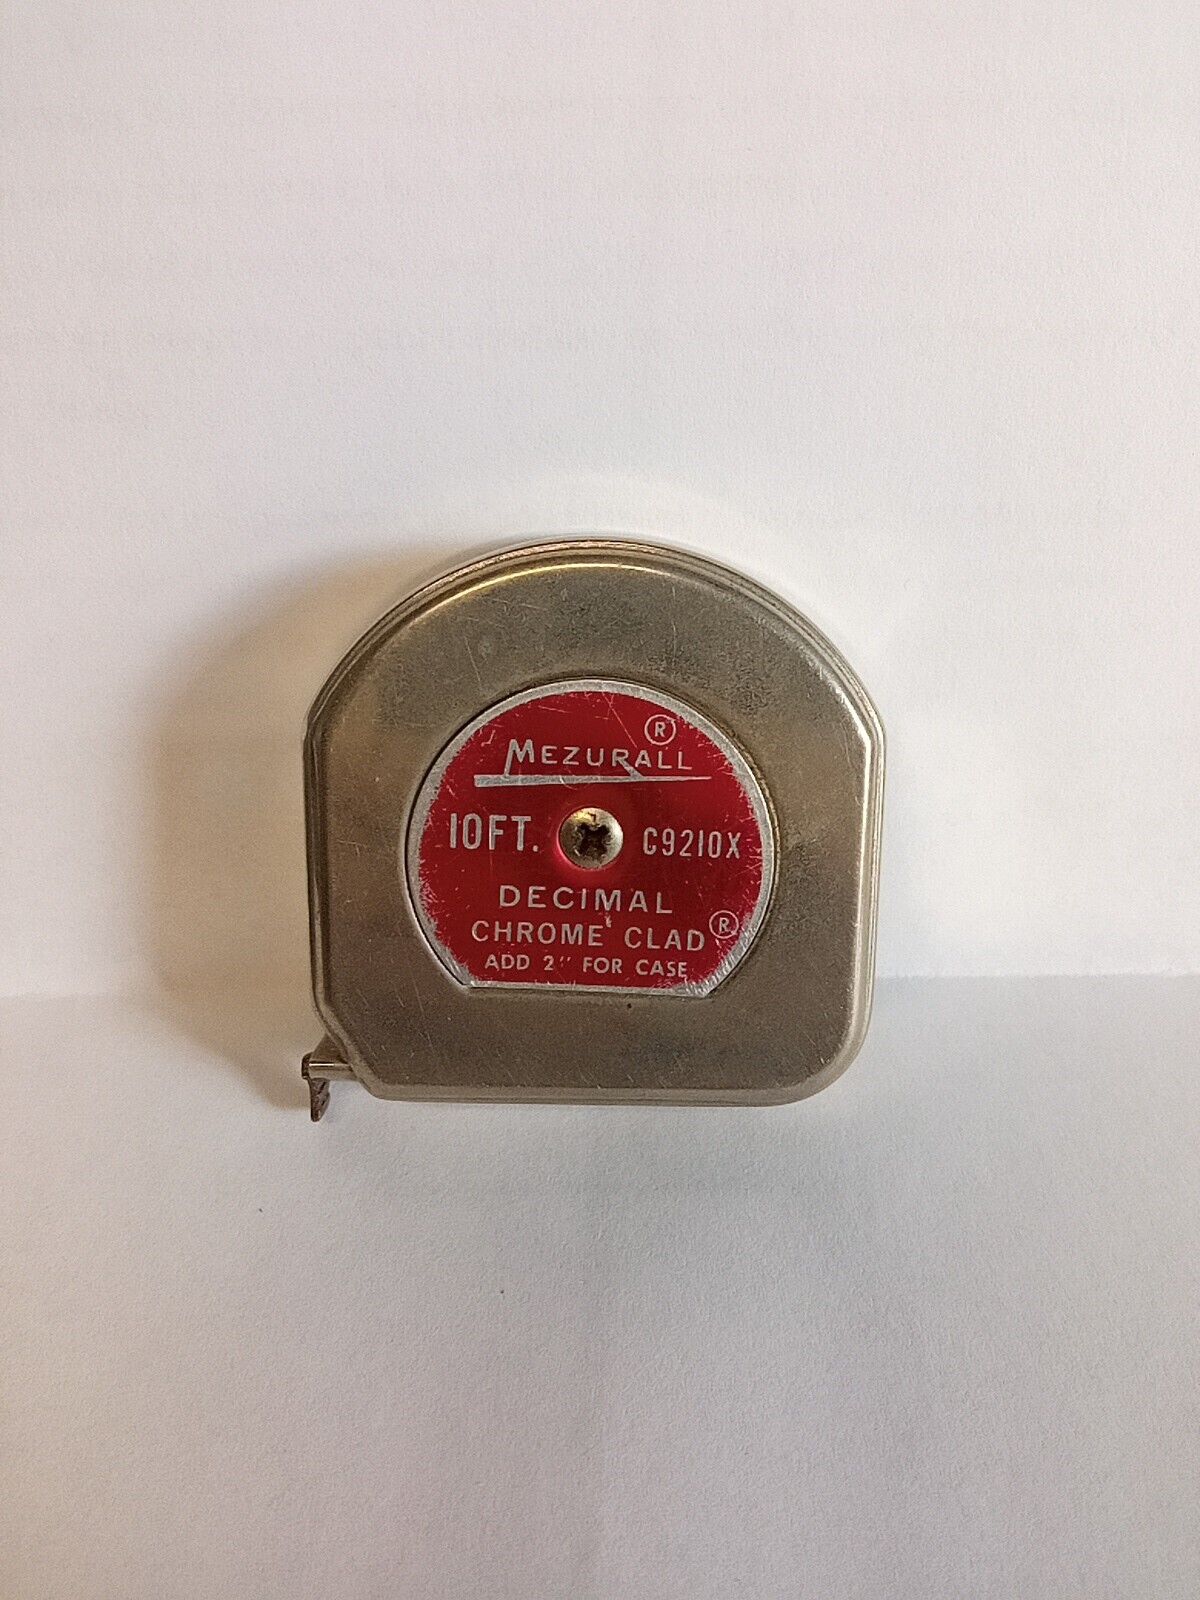 Vintage Lufkin C9210 Mezurall 10 FT. Tape Rule Measure Rare Made in USA